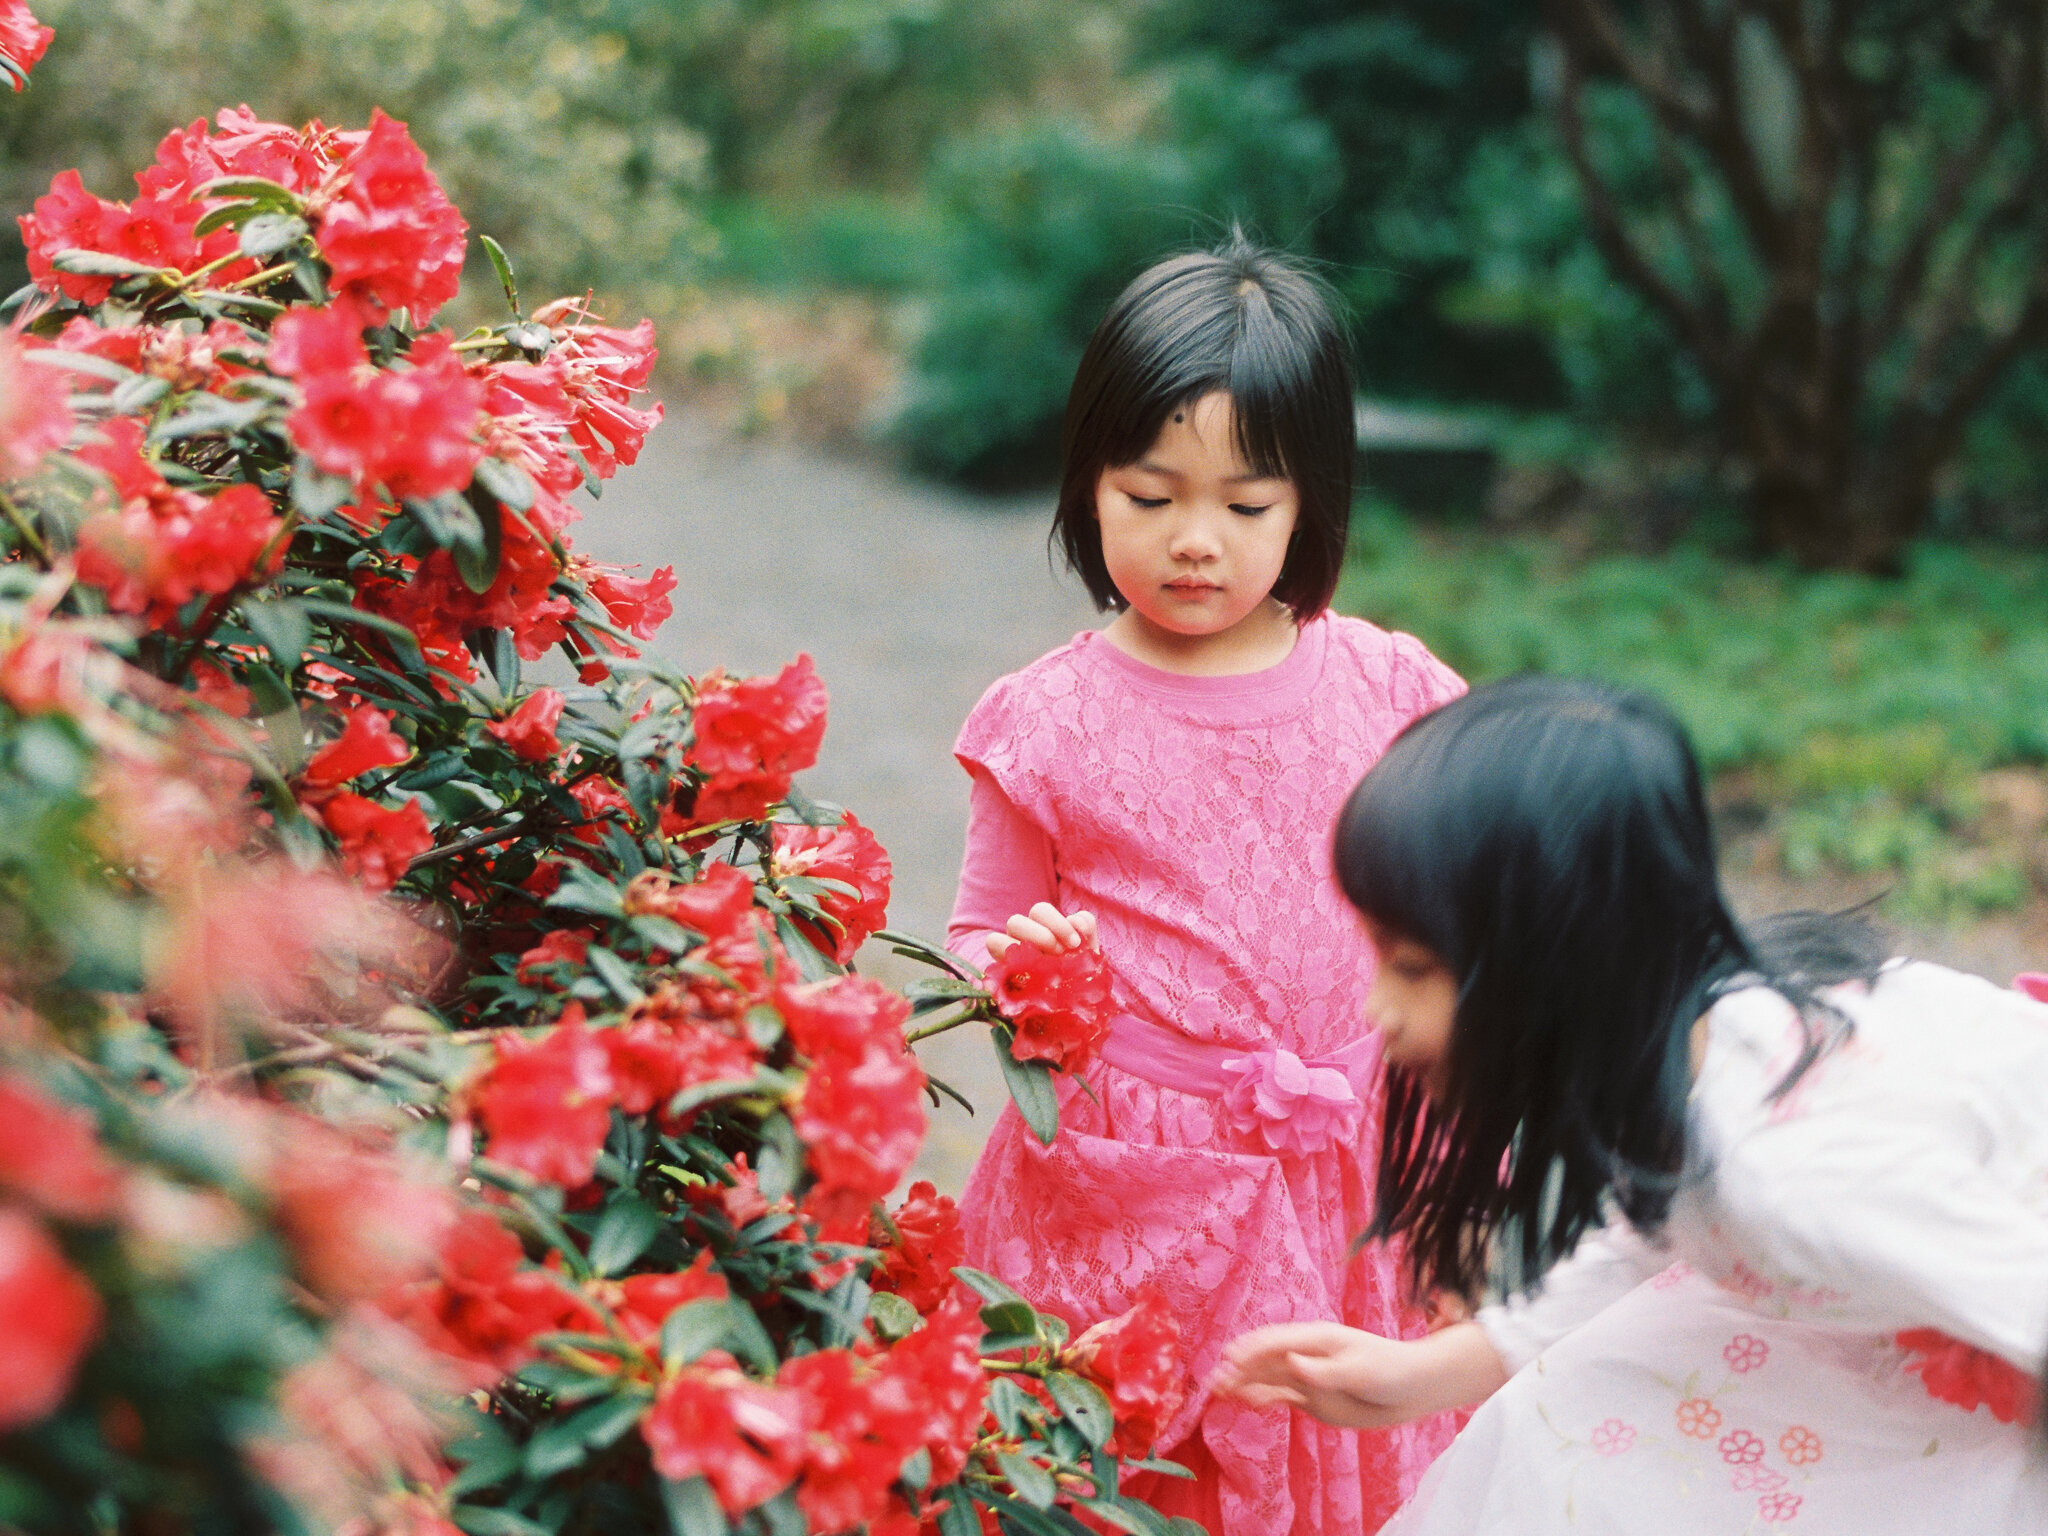 Victoria BC spring film family photography 010.JPG